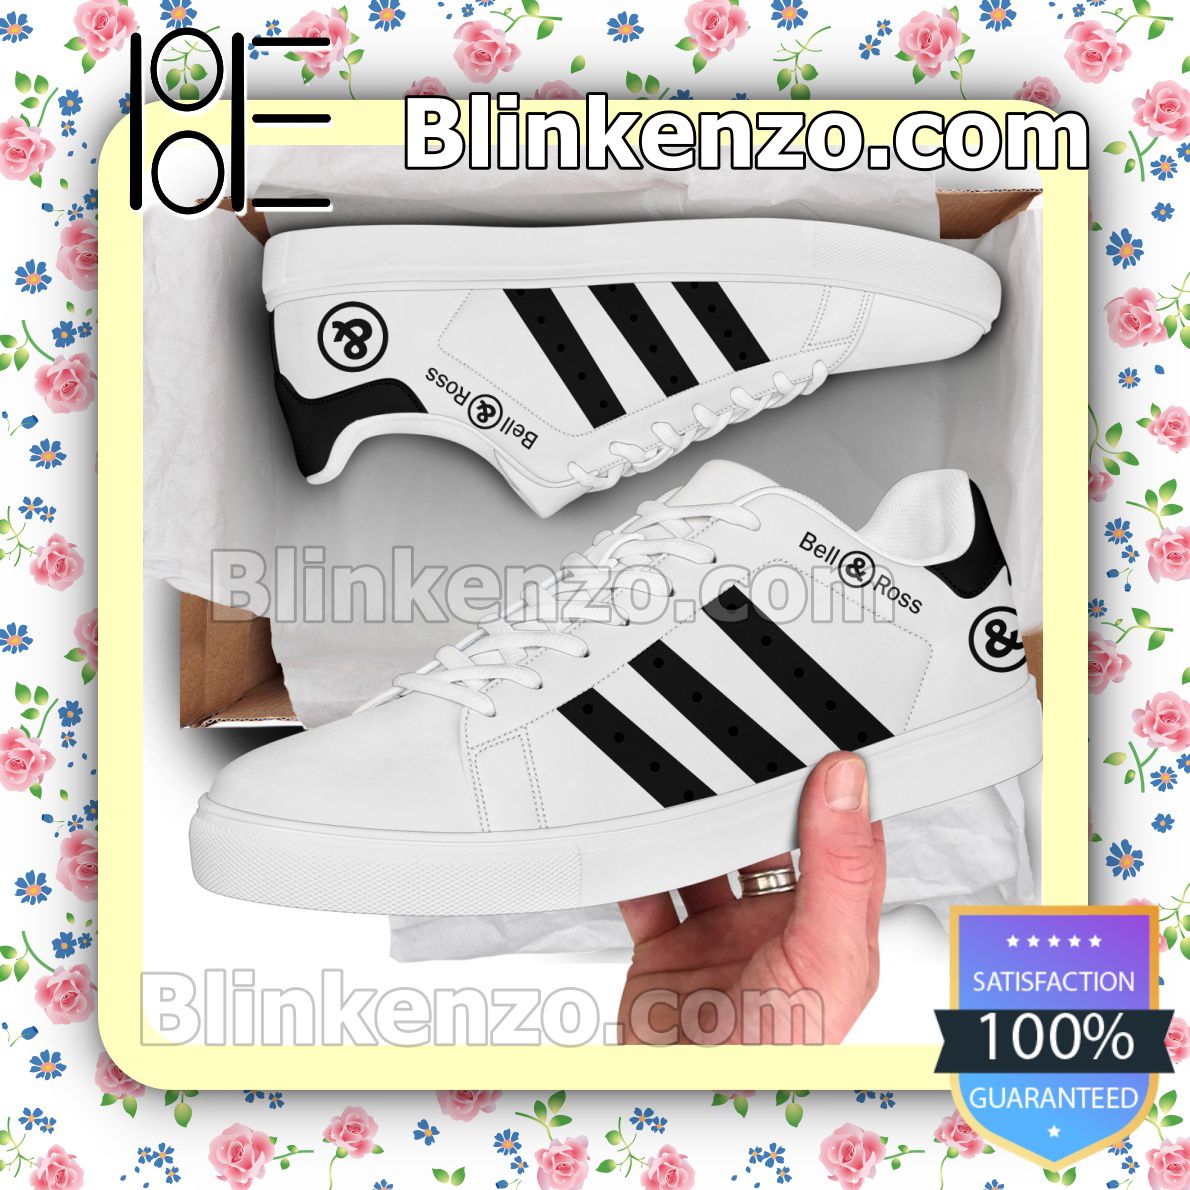 Bell & Ross Company Brand Adidas Low Top Shoes